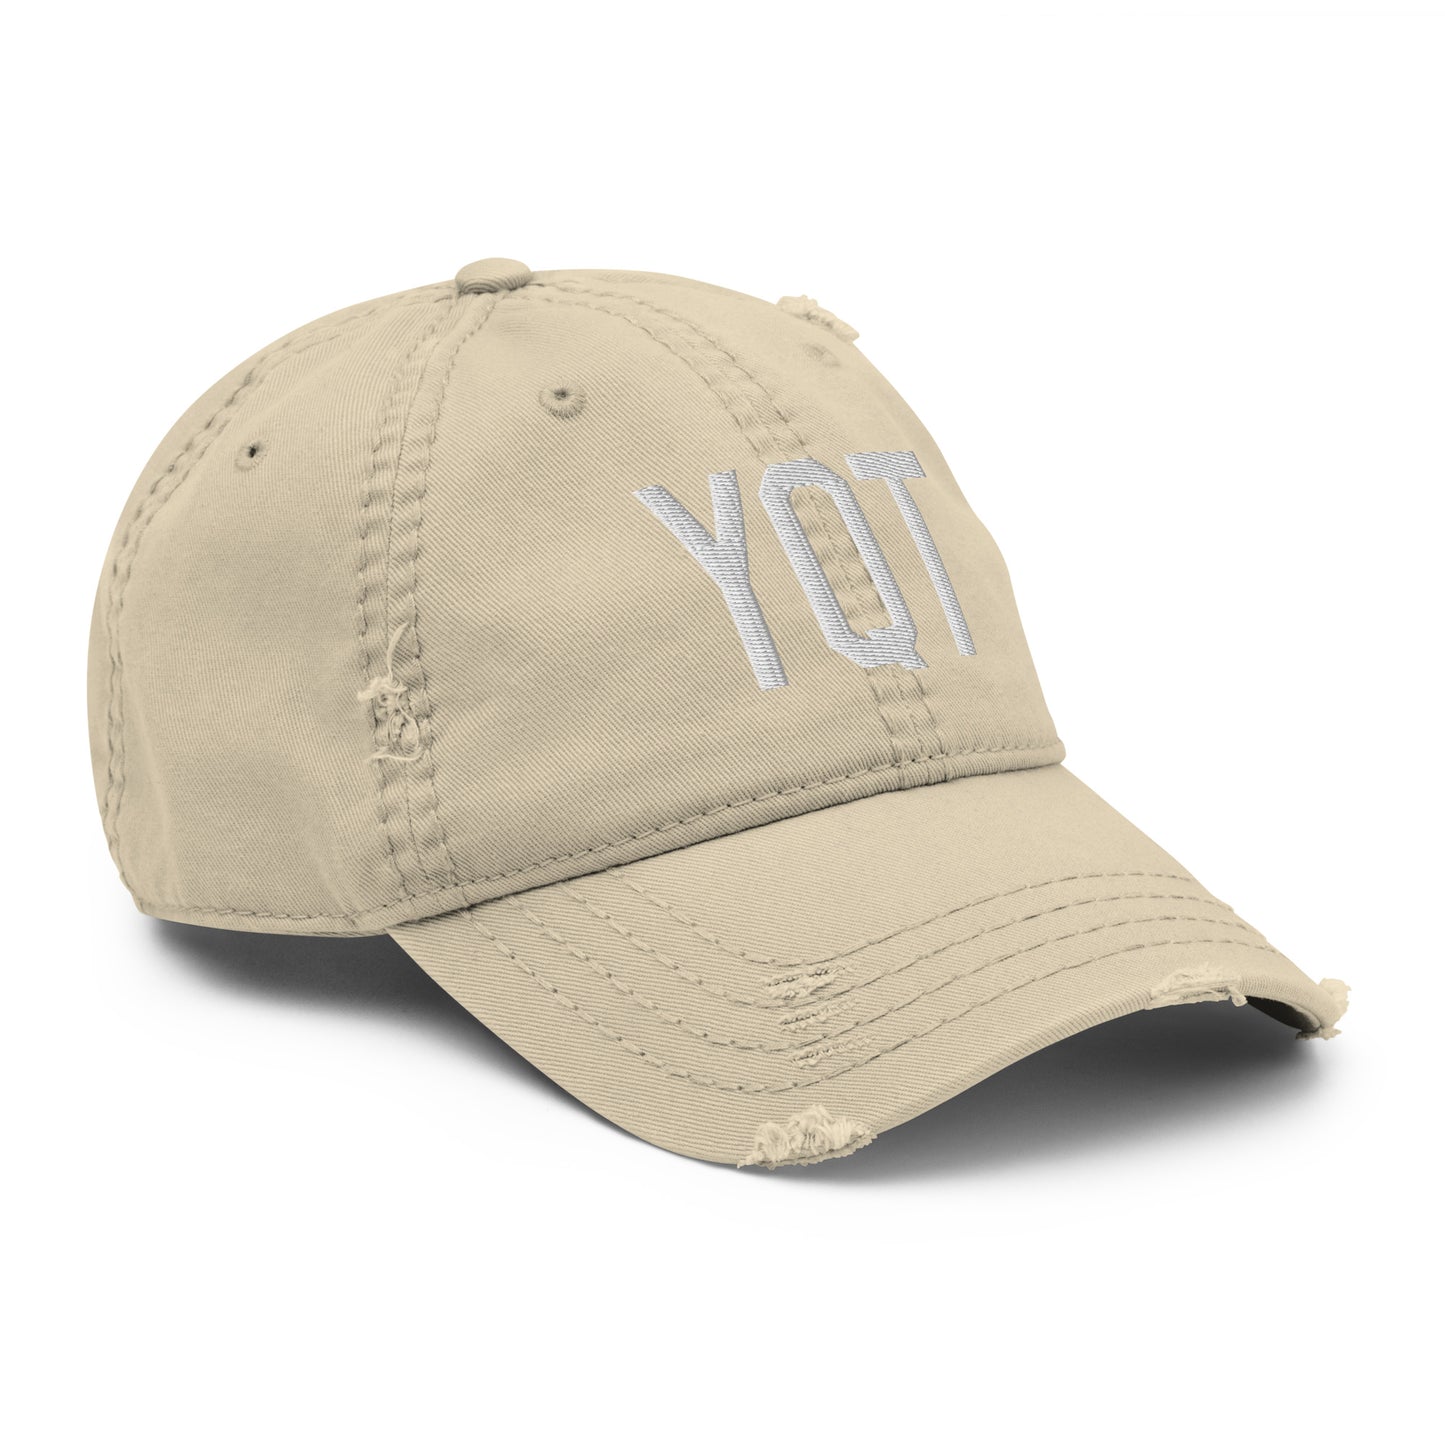 Airport Code Distressed Hat - White • YQT Thunder Bay • YHM Designs - Image 20